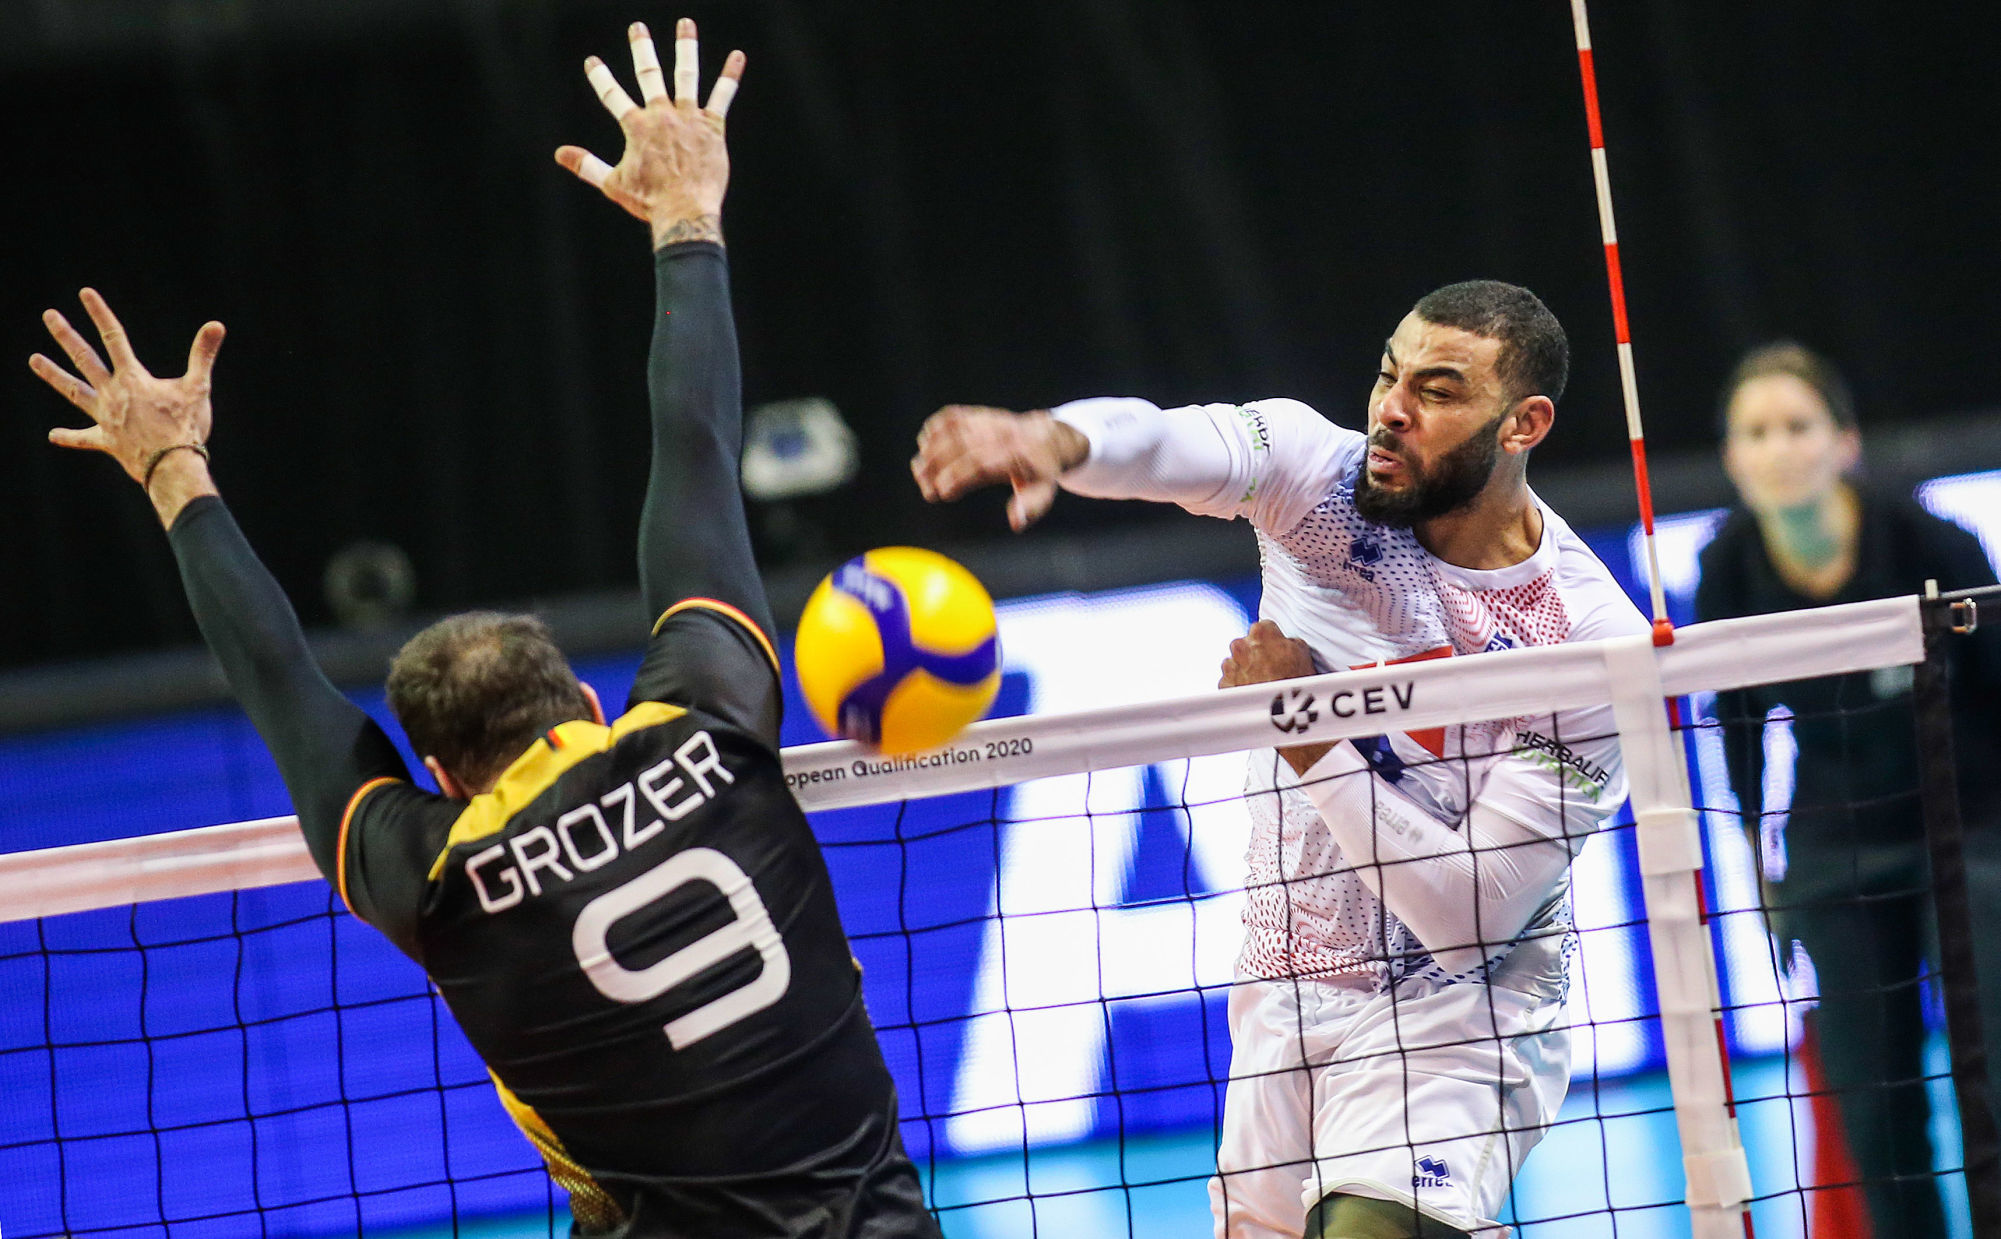 10 January 2020, Berlin: Volleyball, men: Olympic qualification, France - Germany, final round, final, Max-Schmeling-Halle. Earvin N'Gapeth (r) from France plays the ball against Germany's György Grozer (l). Photo: Andreas Gora/dpa | usage worldwide 

Photo by Icon Sport